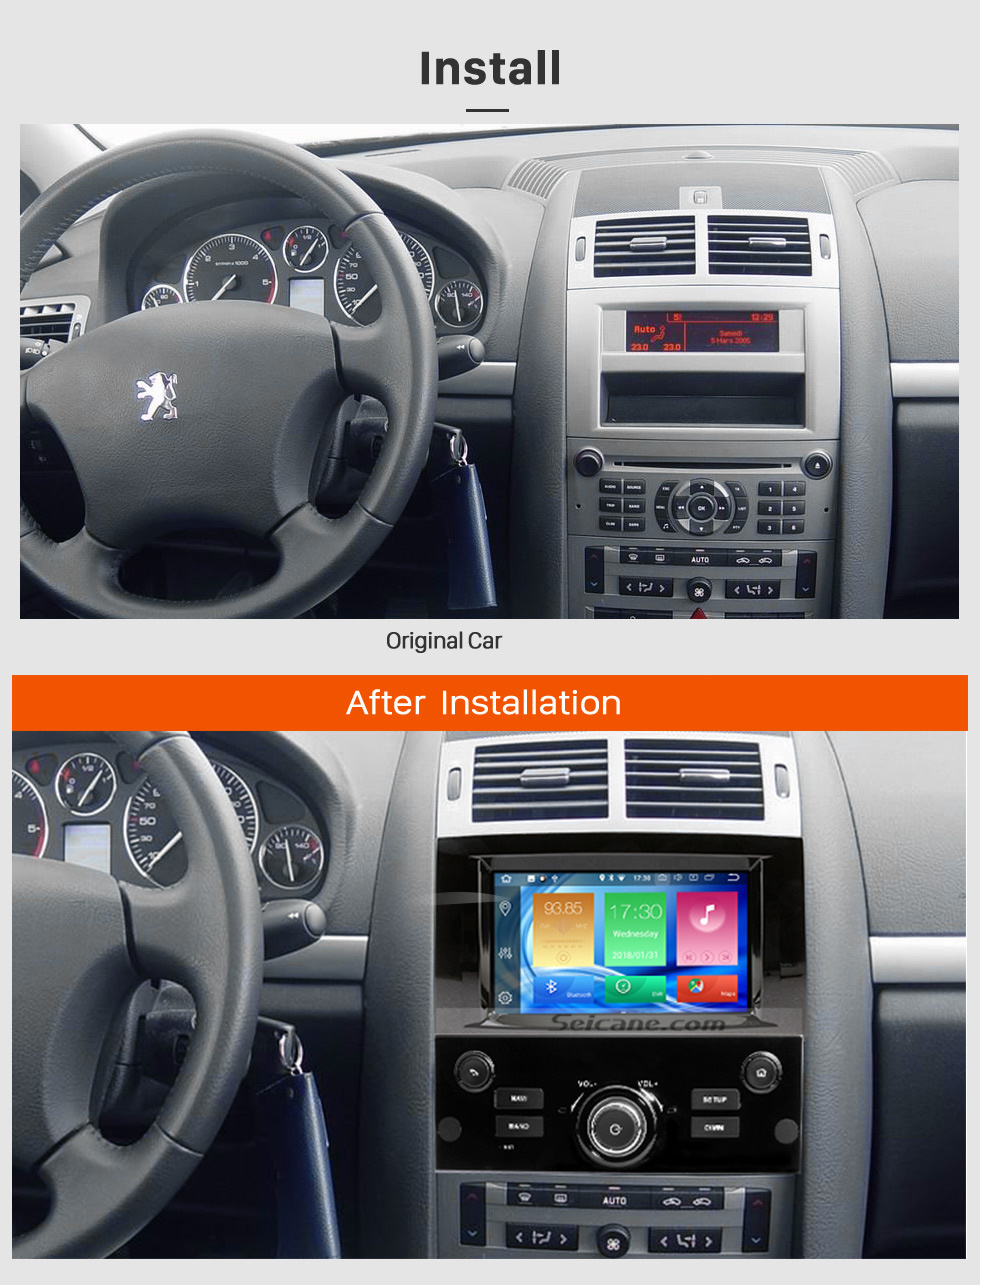 Seicane OEM Android Radio GPS Navigation system for 2004-2010 Peugeot 407 with Wifi Backup Camera Bluetooth Carplay Steering Wheel Control OBD2 DAB+ DVR